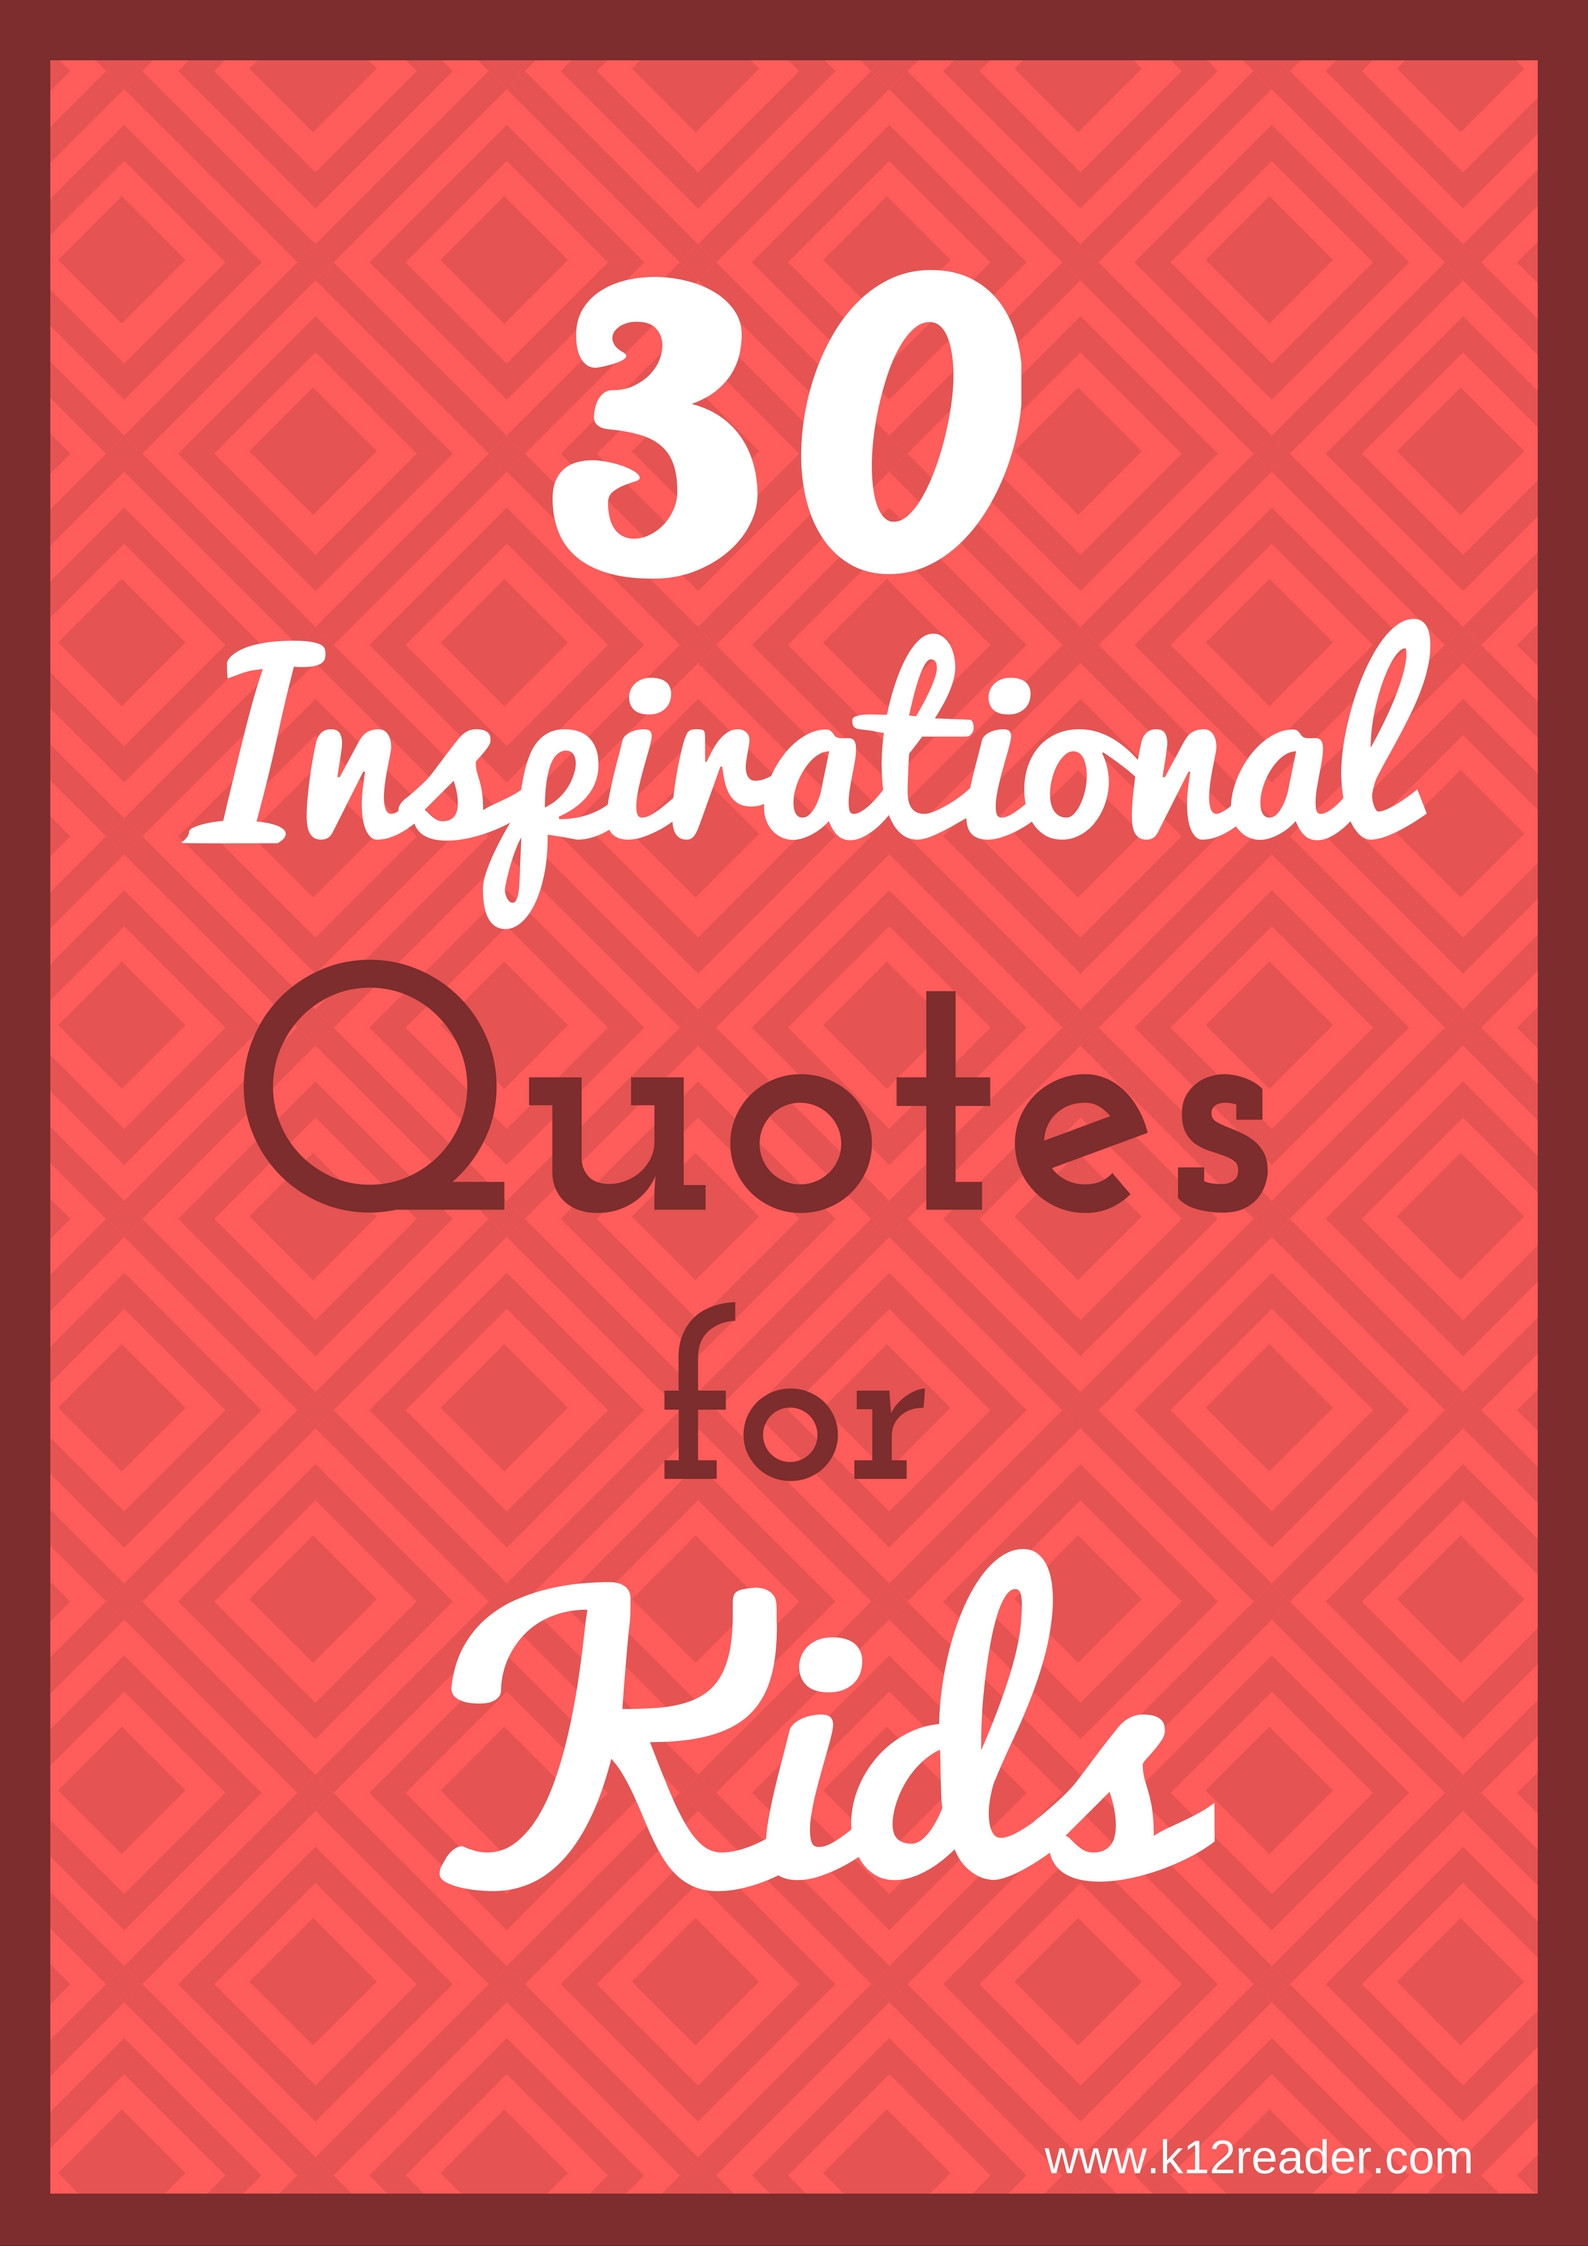 Good Quotes For Children
 30 Inspirational Quotes for Kids